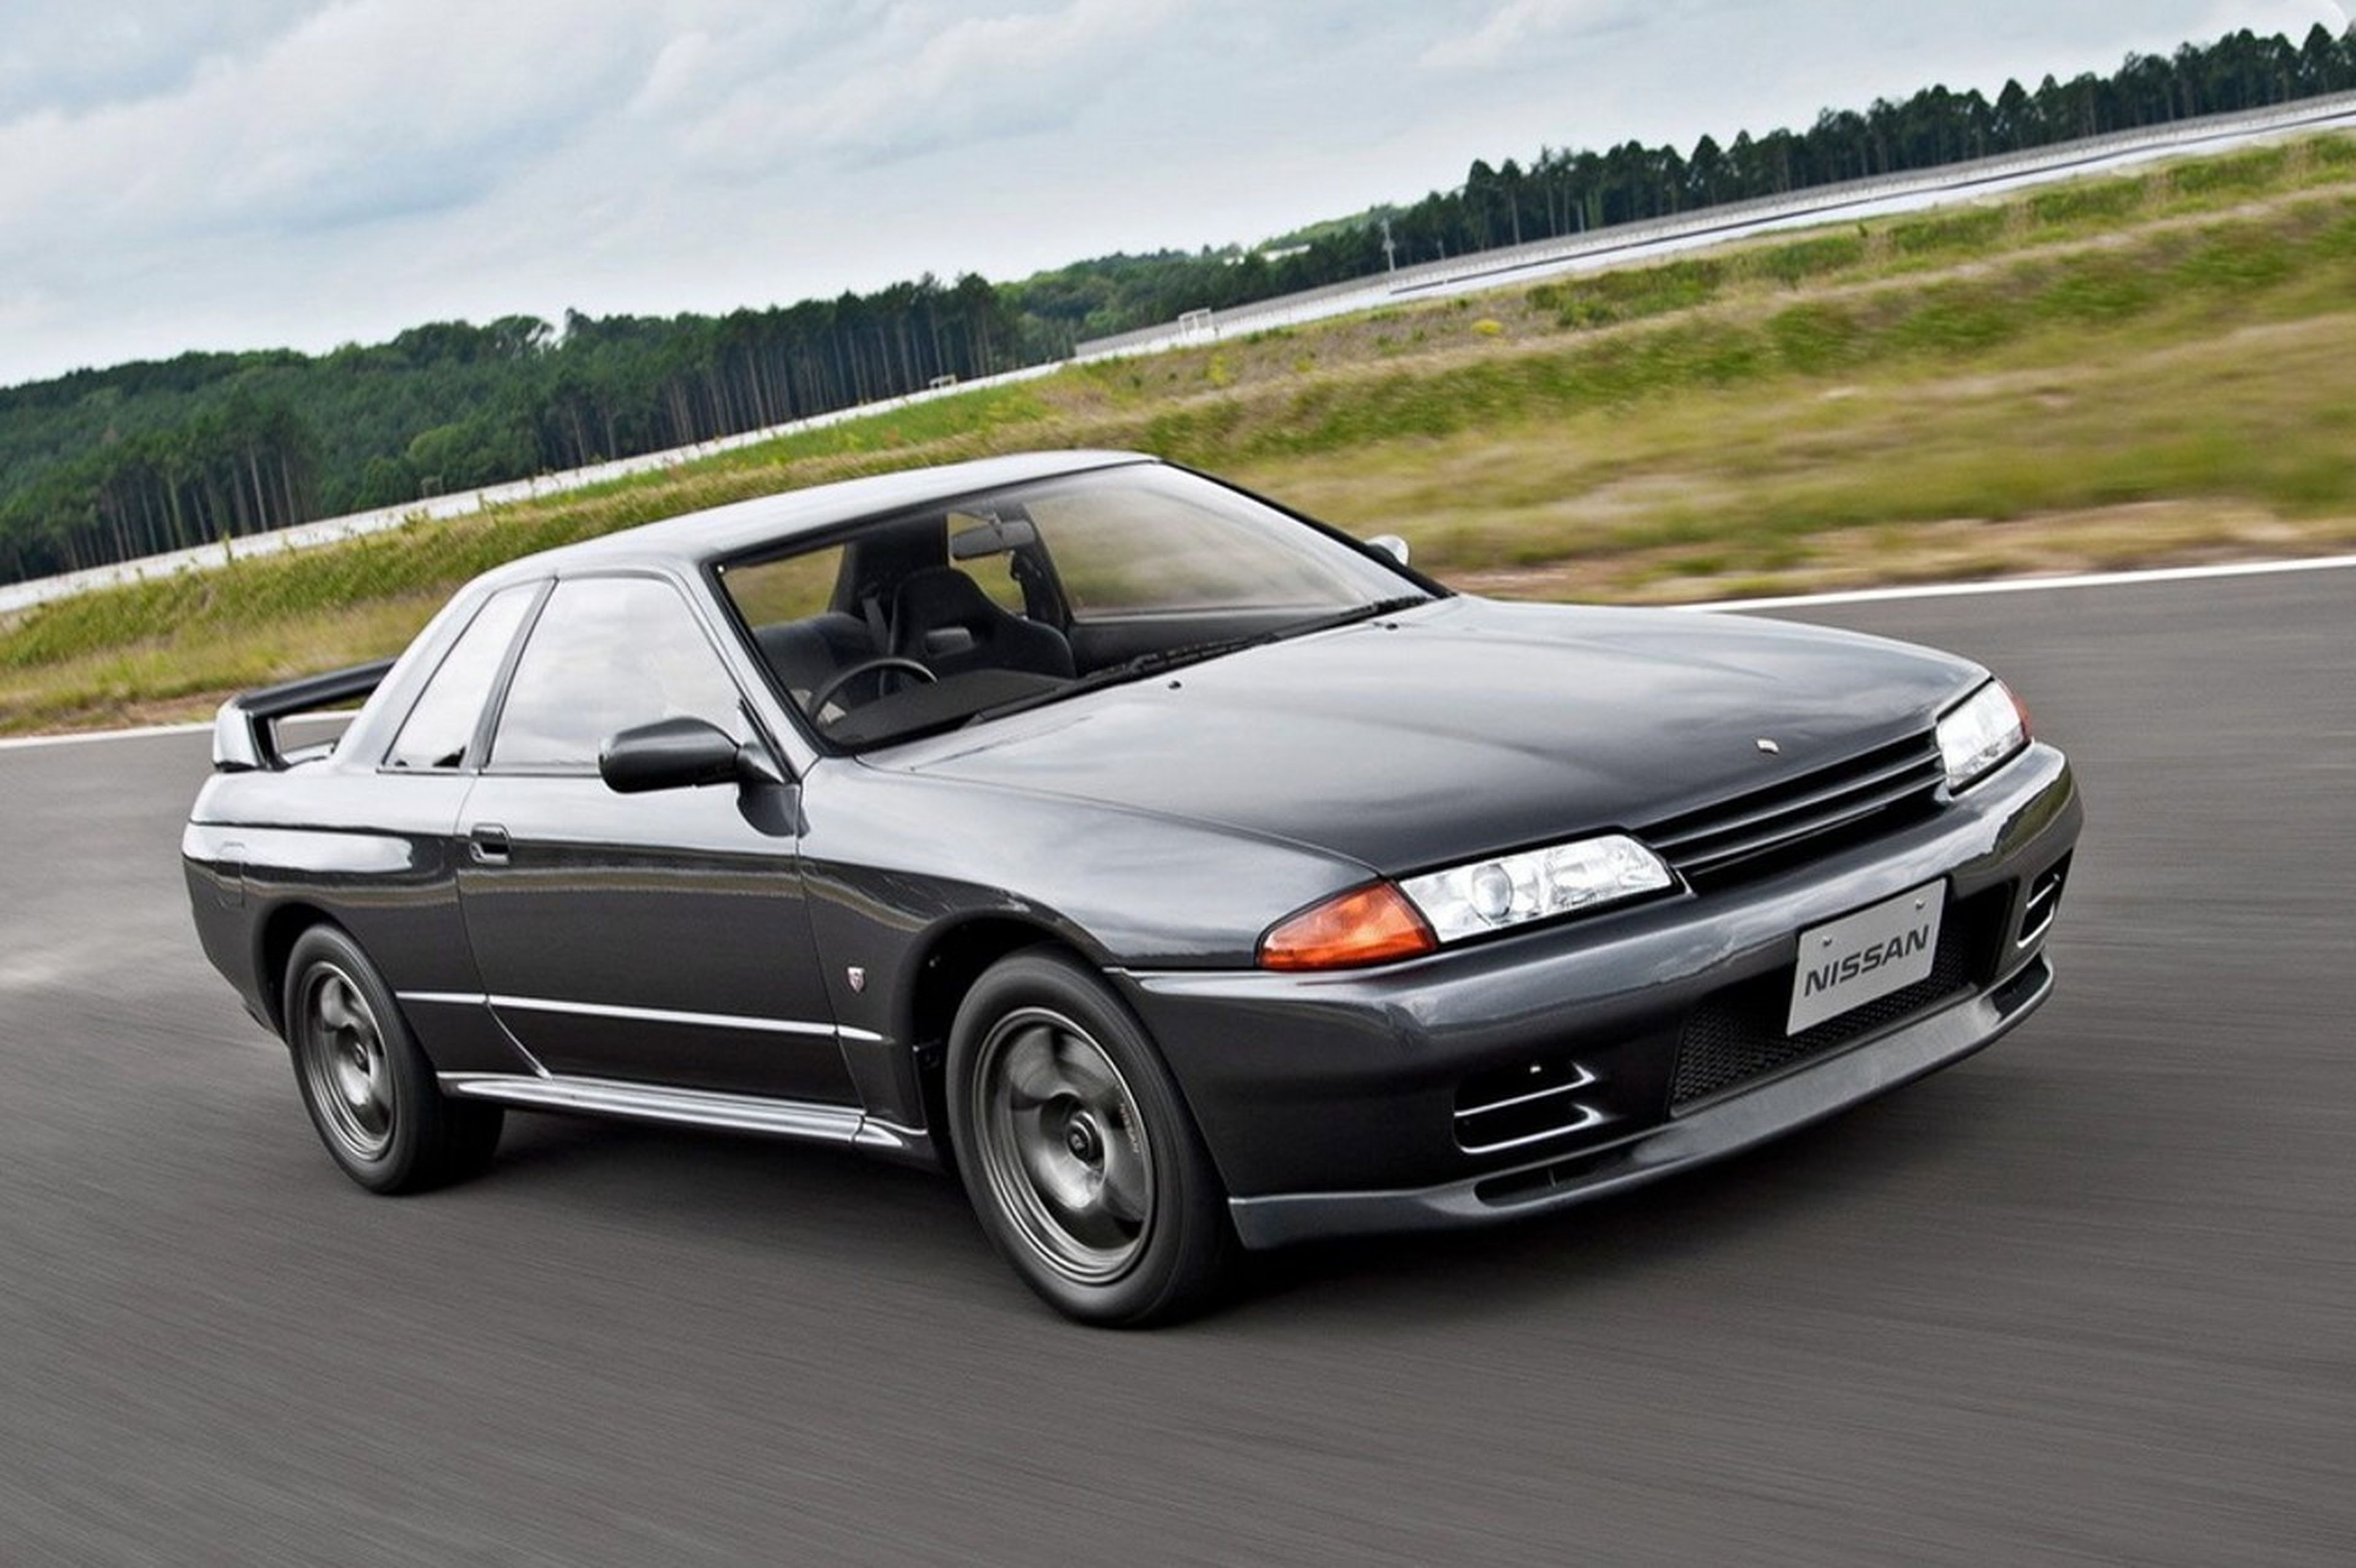 This 930-HP R32 Nissan GT-R In Dry Carbon Midnight Purple Is a